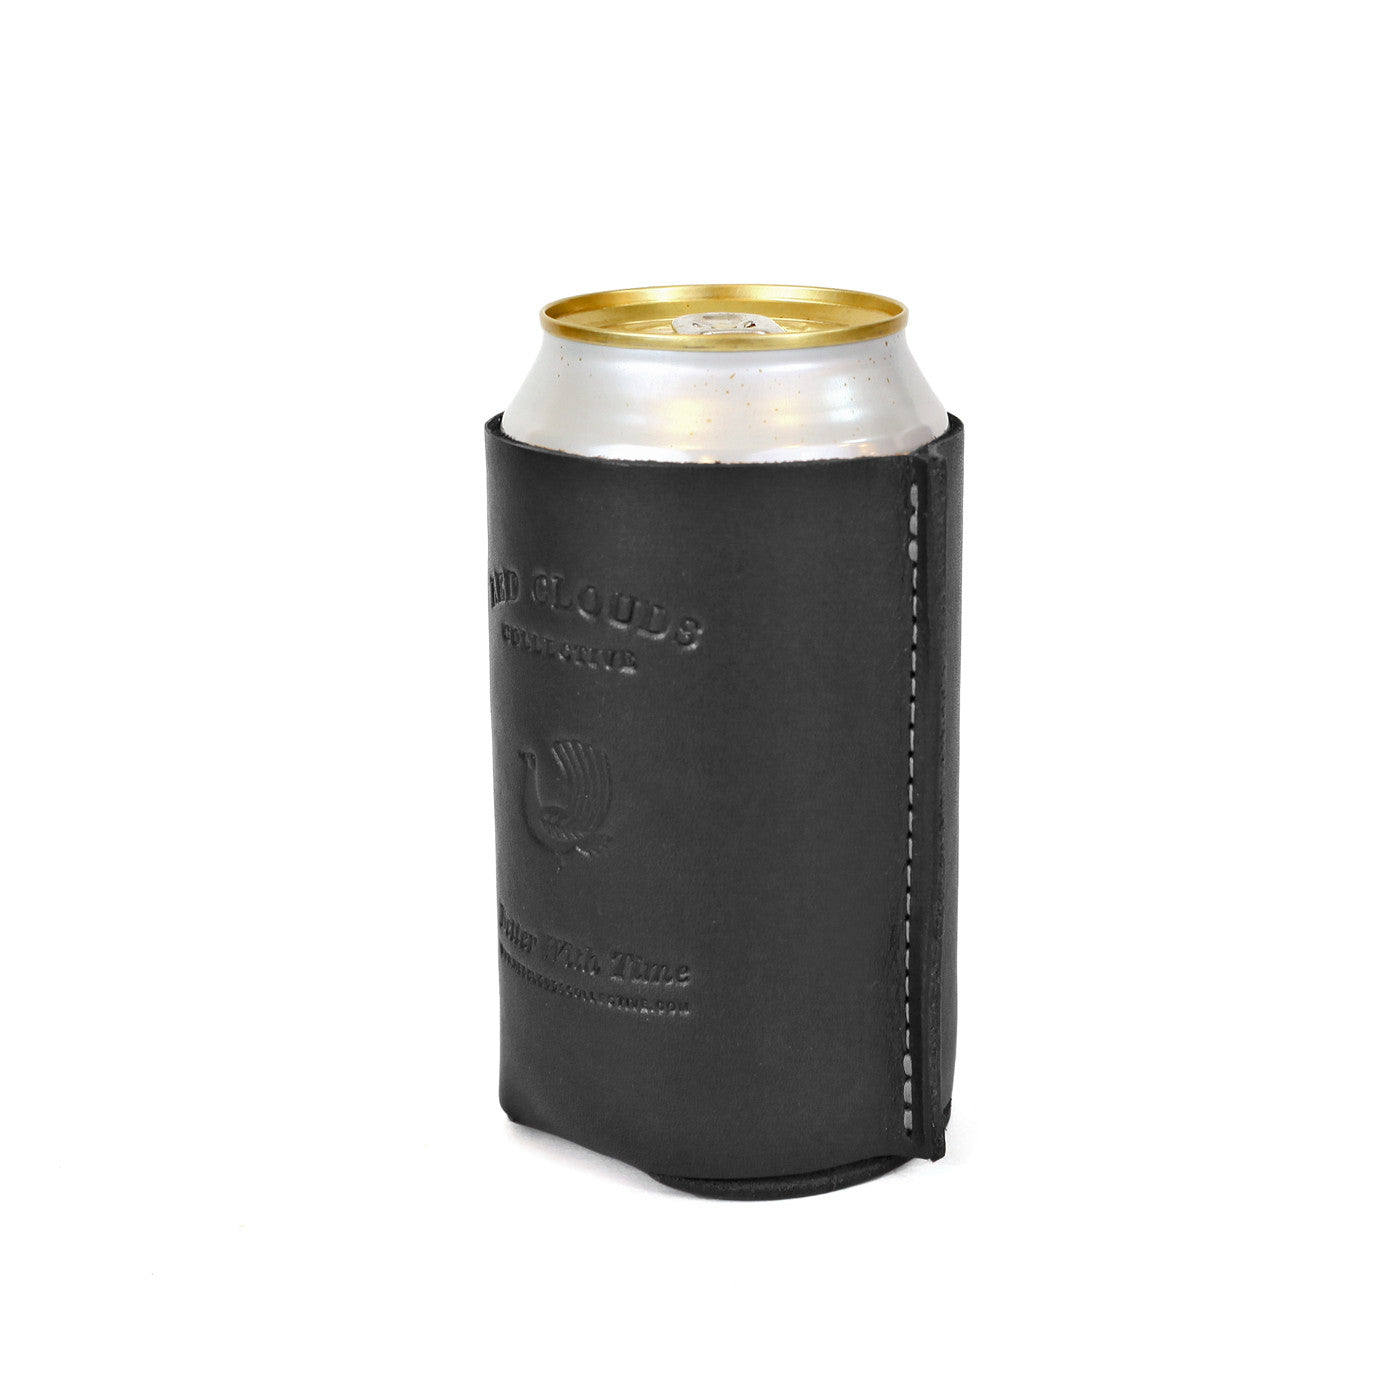 leather koozie, leather can, leather coozie, coaster, leather beer holder, leather bottle koozie, made in usa, black leather